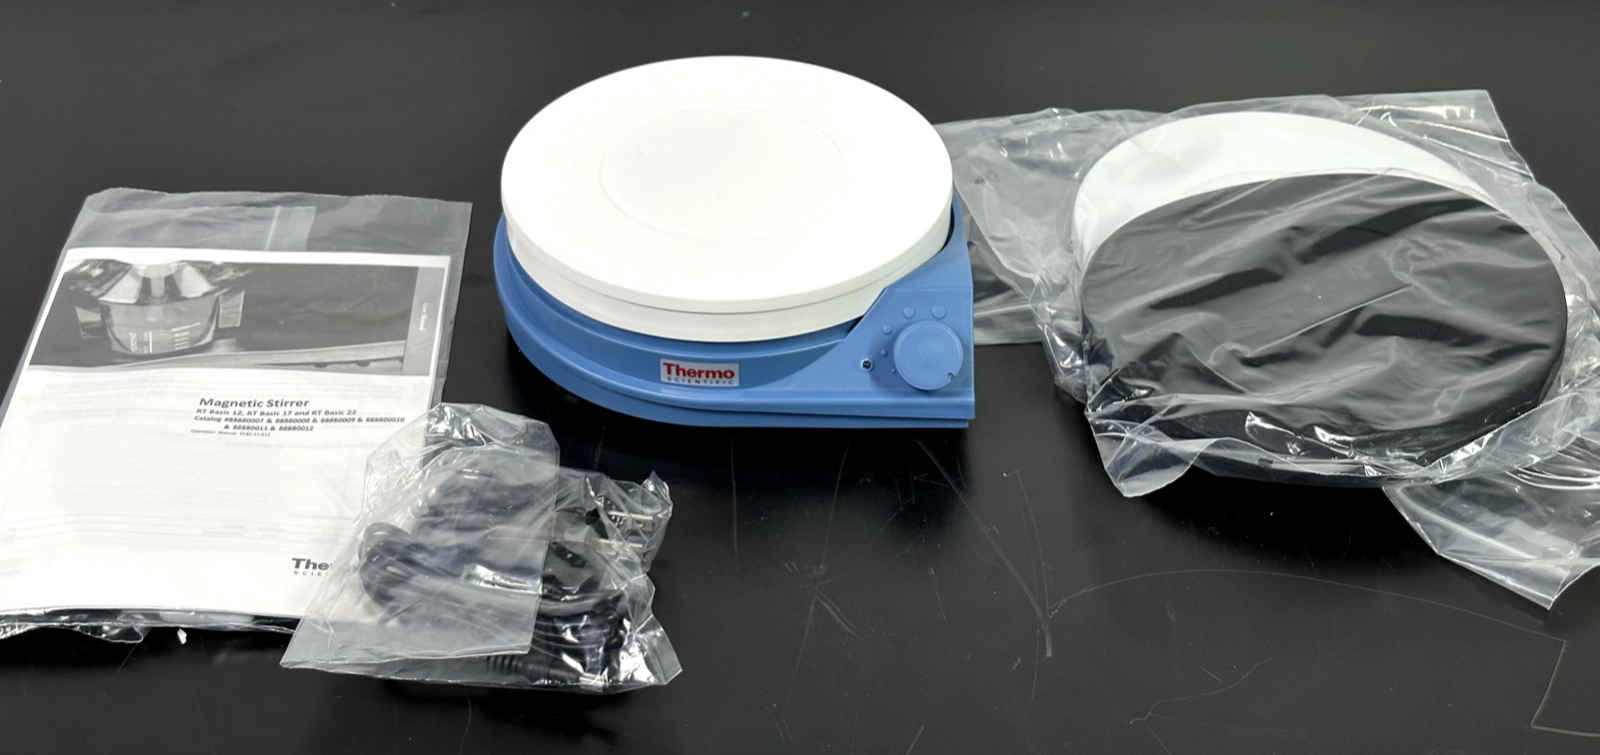 Thermo Scientific RT Basic Series Magnetic Stirrer